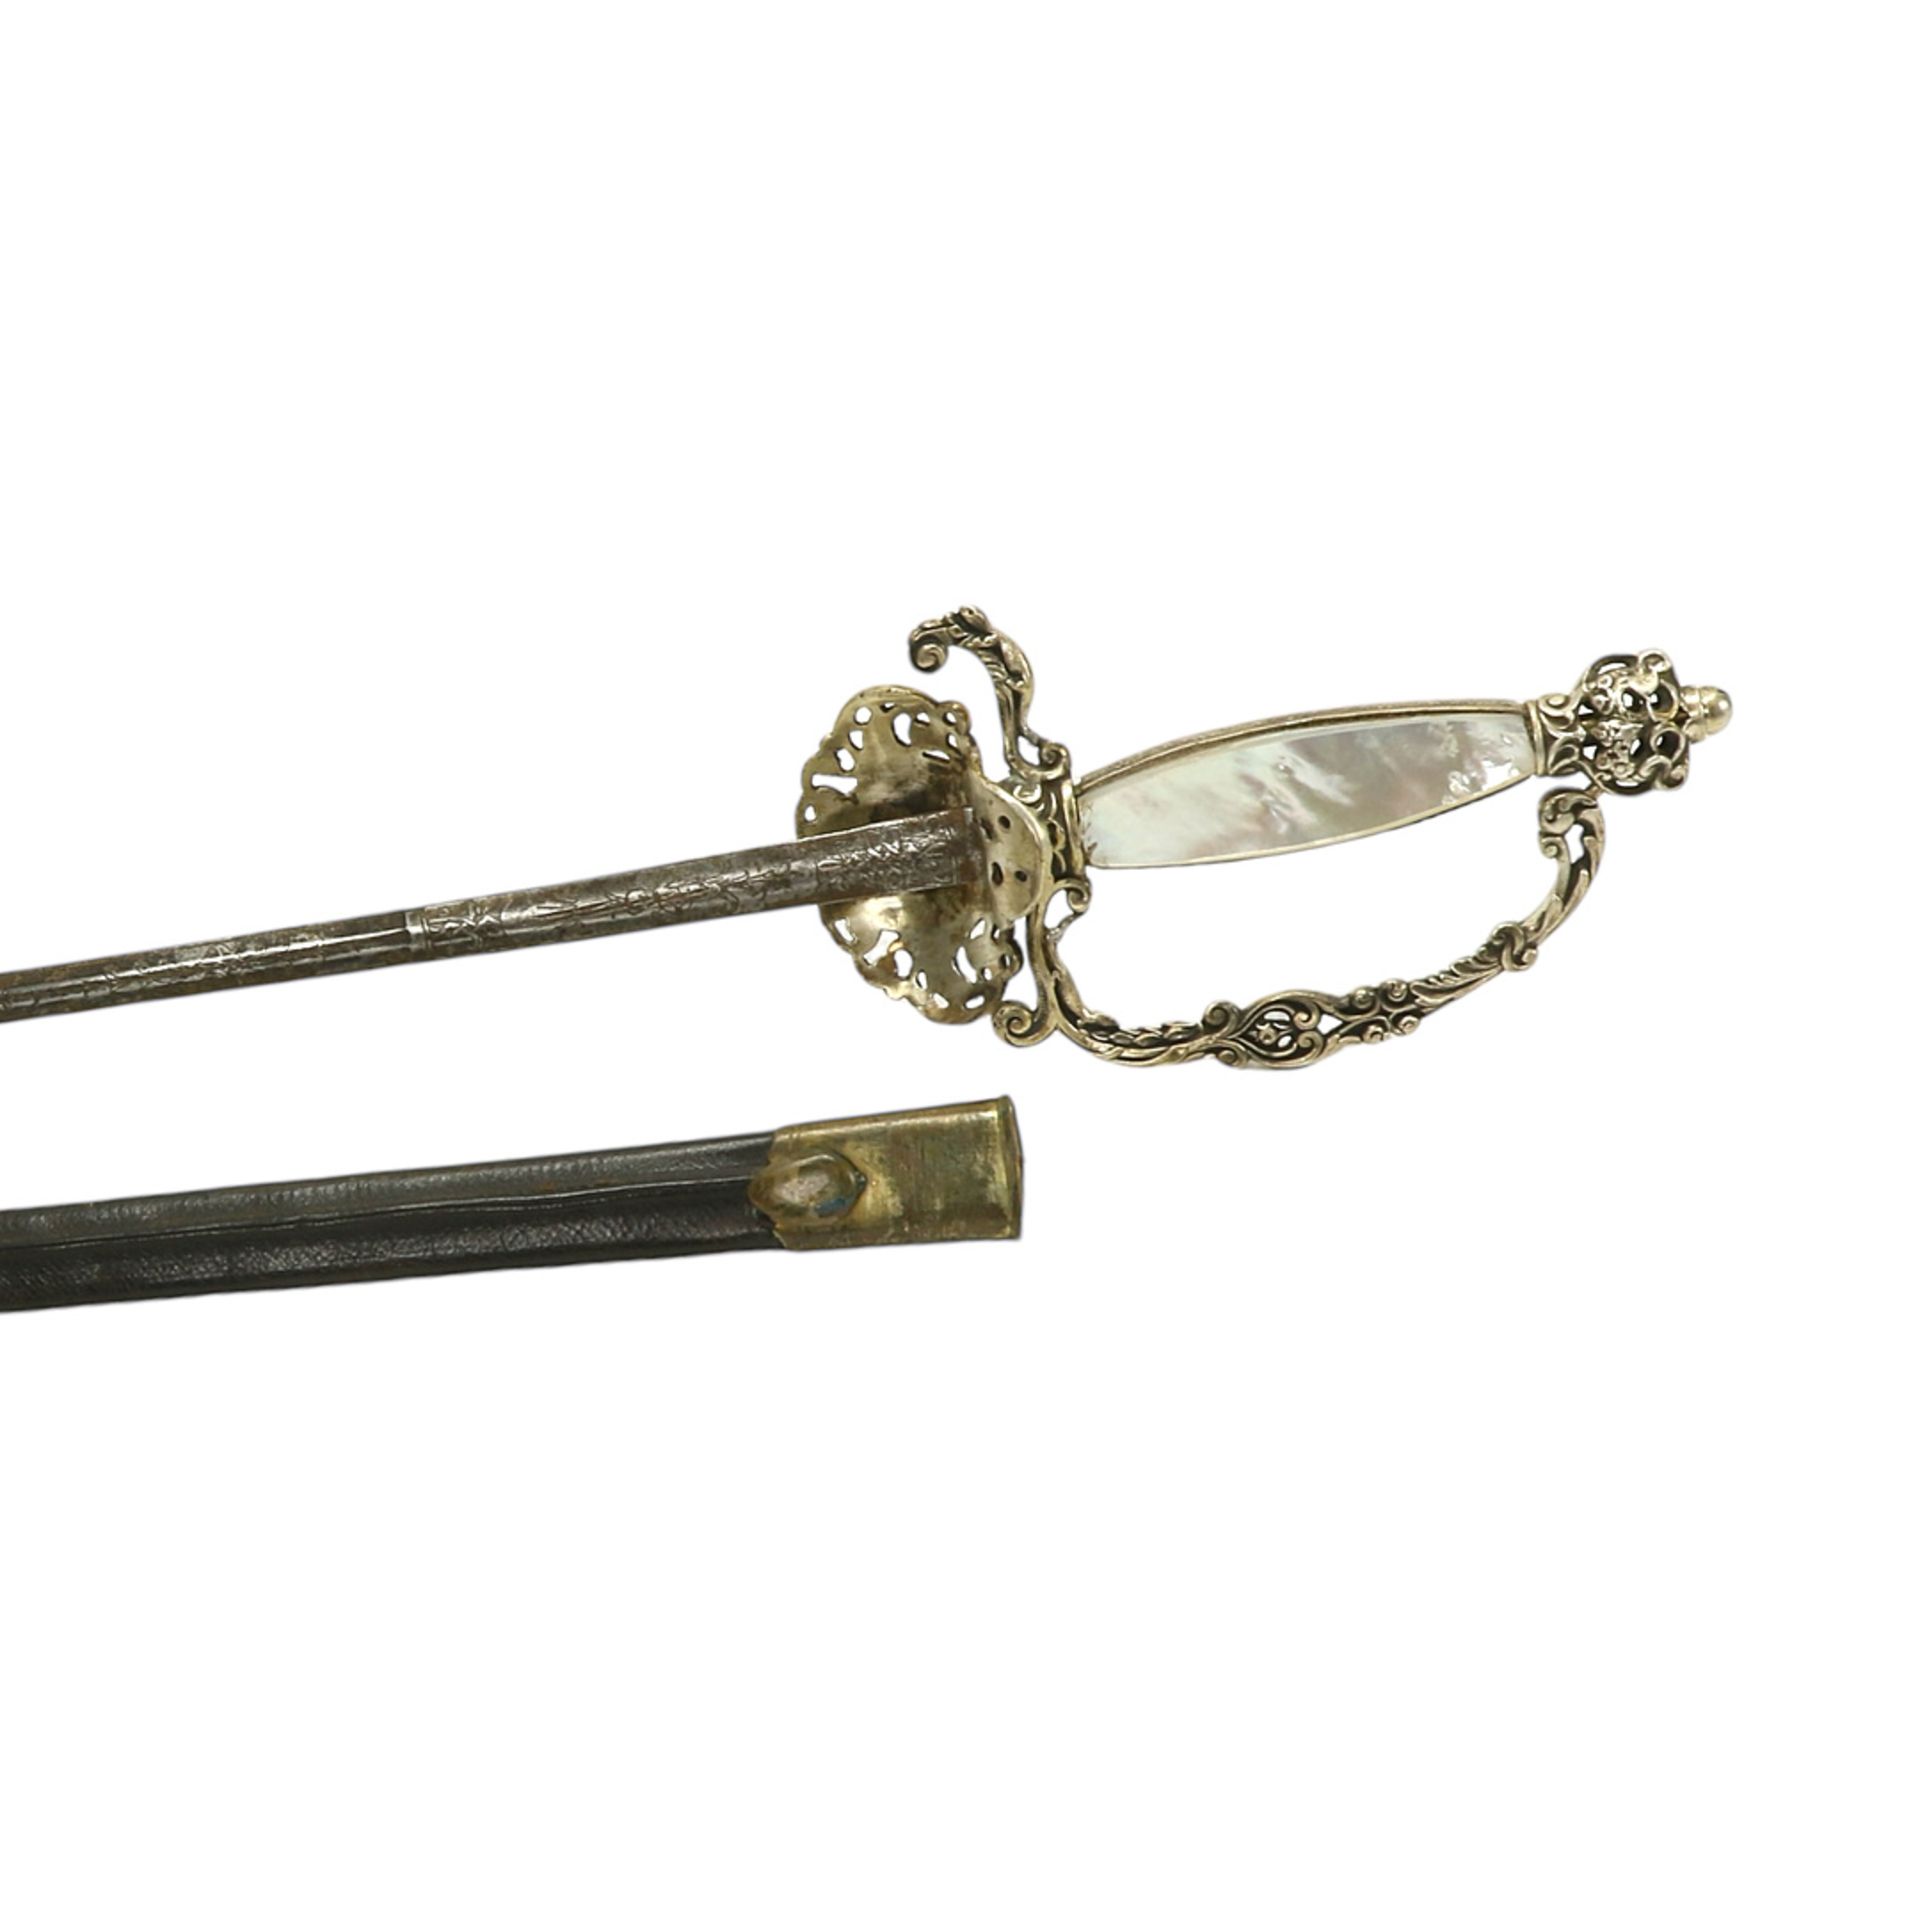 Probably a French decorative sword, around 1850 - Image 5 of 5